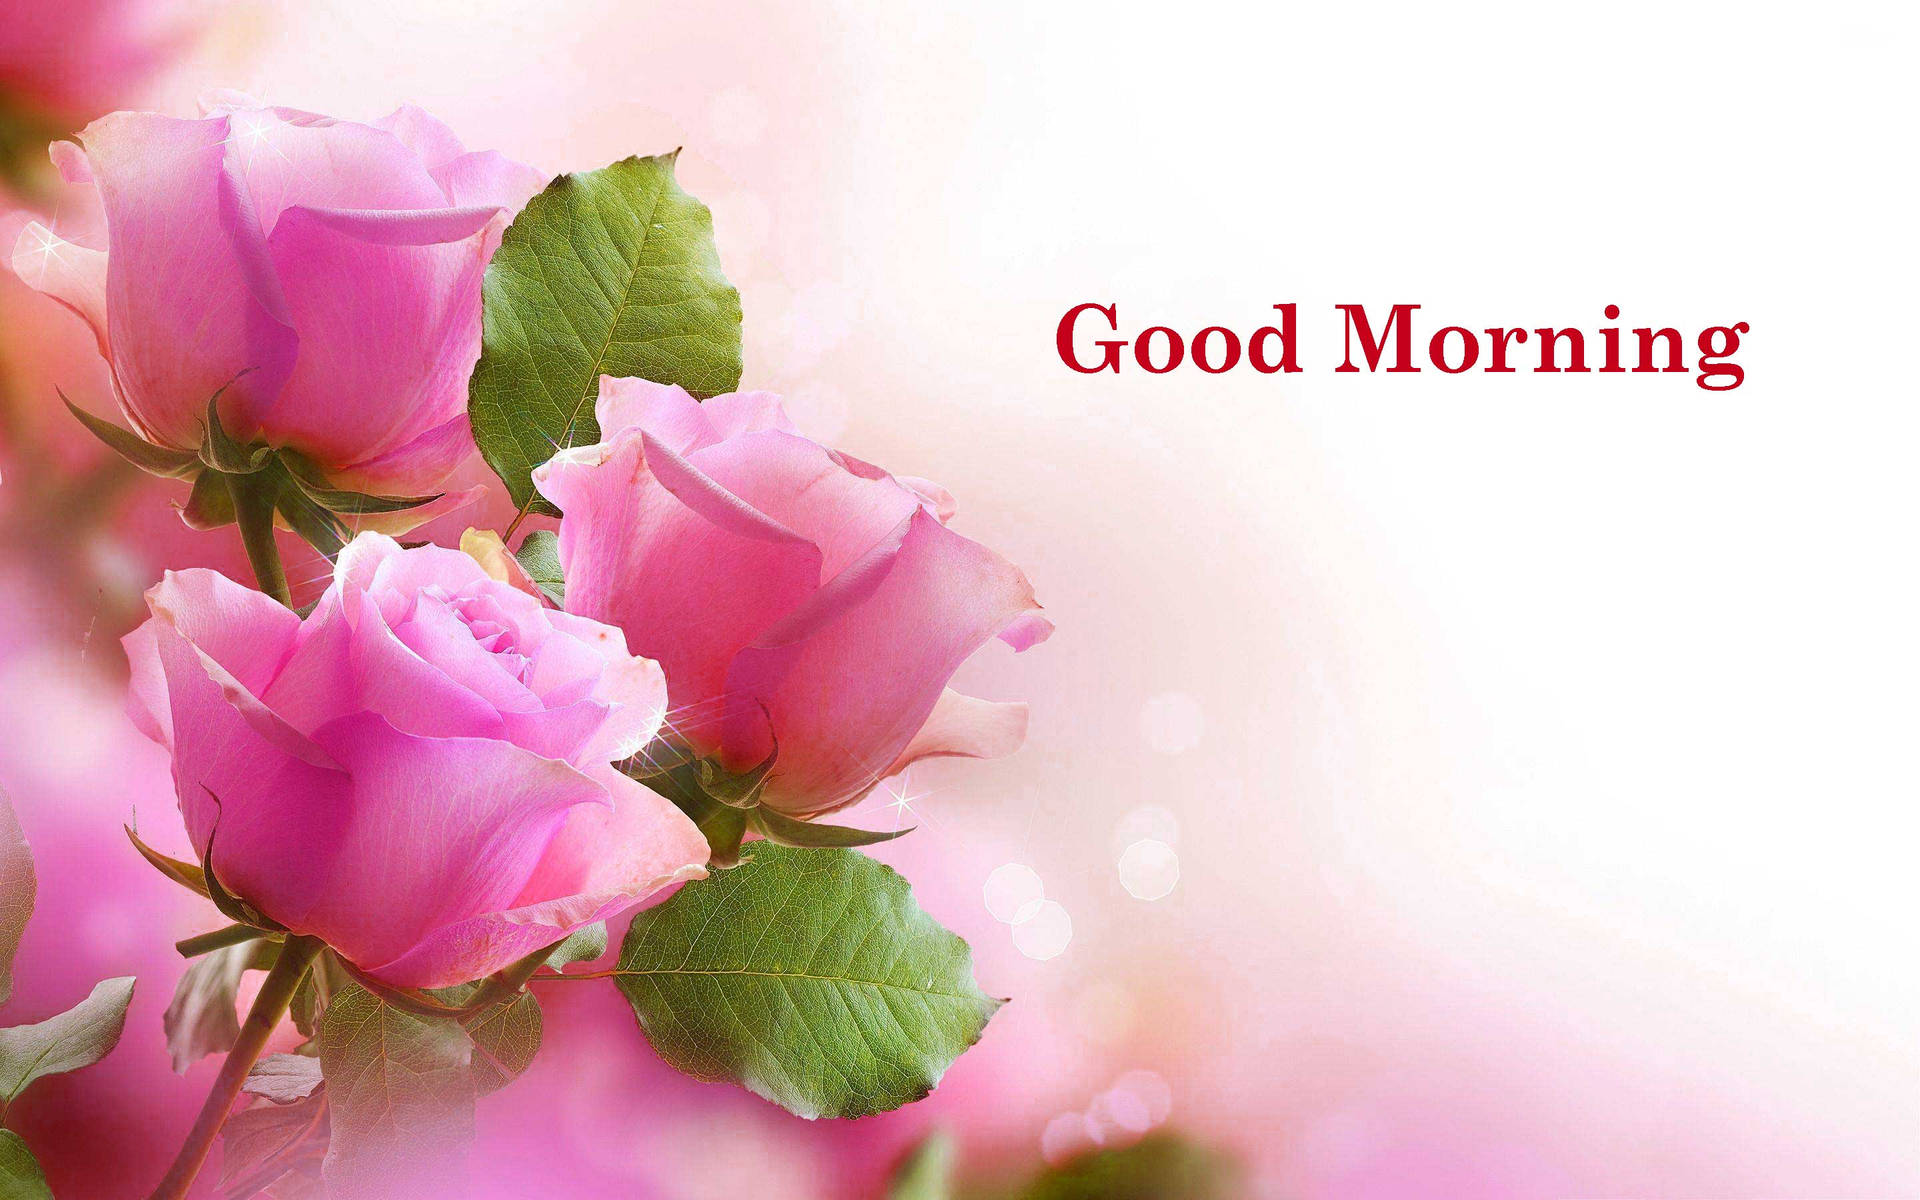 Good Morning Hd With Pink Flowers